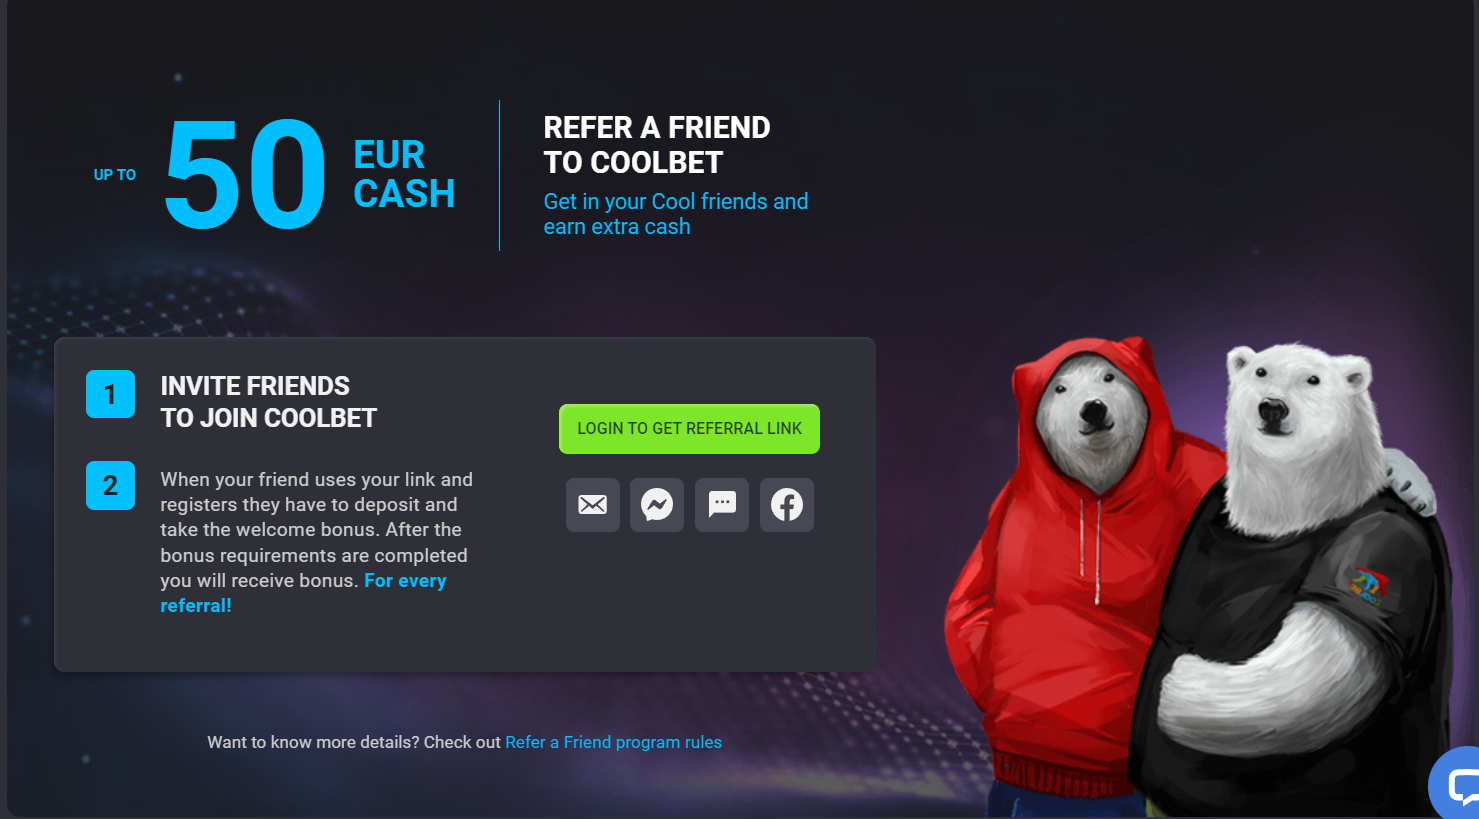 For every referral, the existing user is eligible for a cash prize of up to €50.